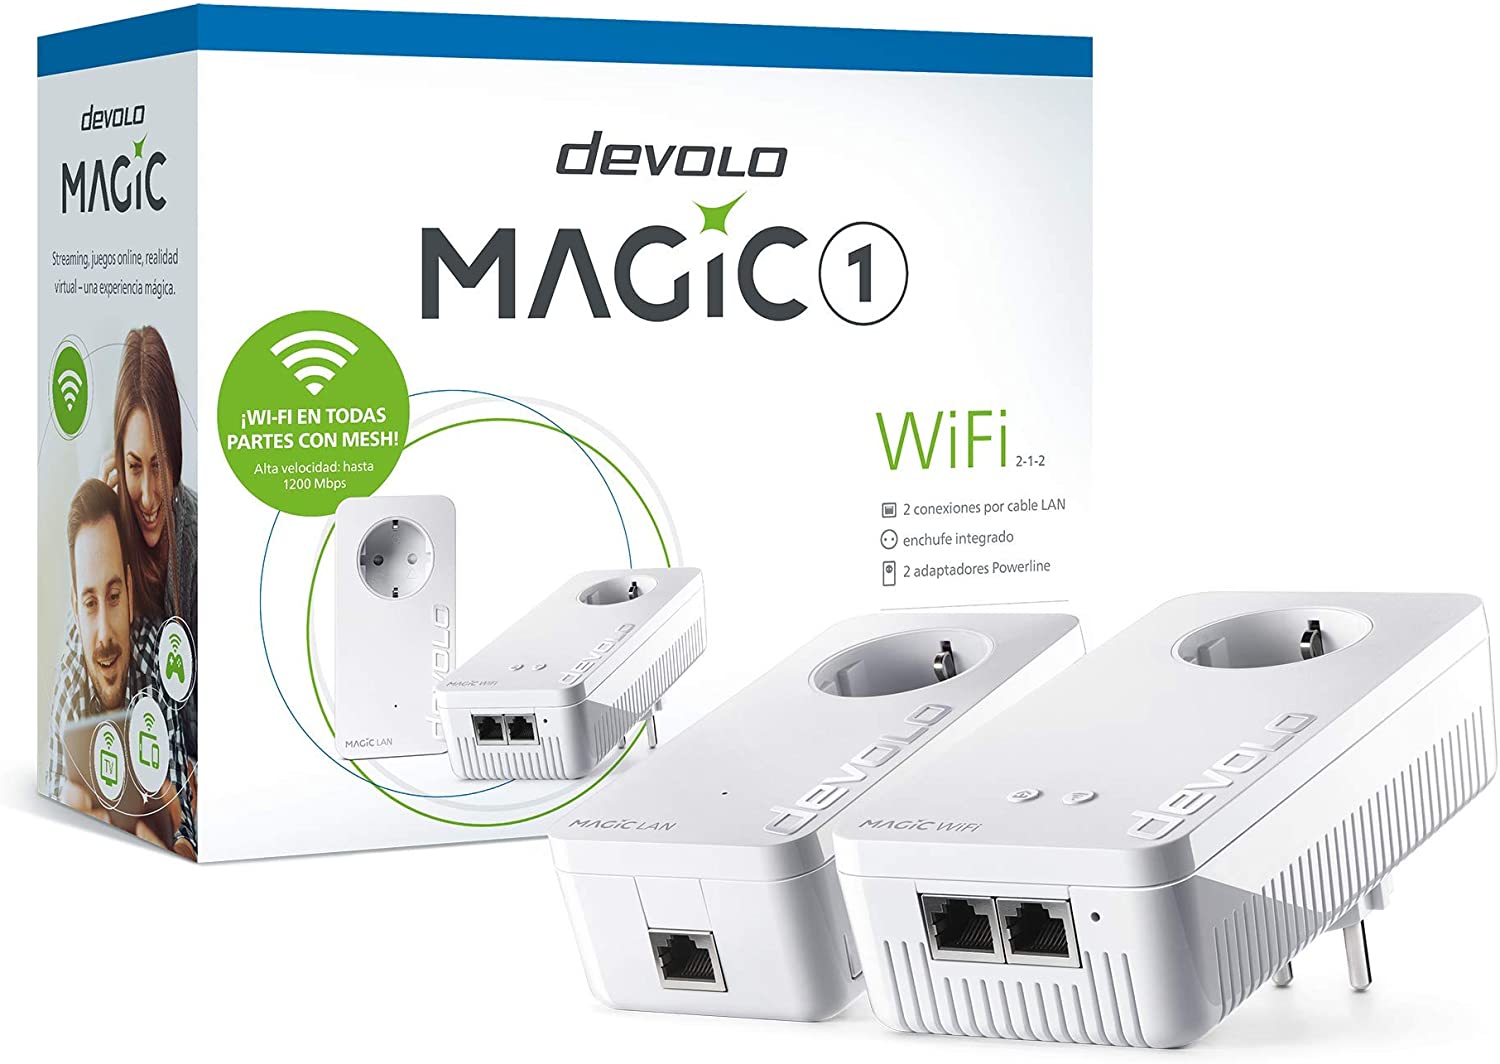 Devolo Magic 1 - Wi-Fi Powerline Start Kit (Wi-Fi ac up to 1200 Mbps, 2 etherne LAN connections, integrated plug, Mesh Wi-Fi) White